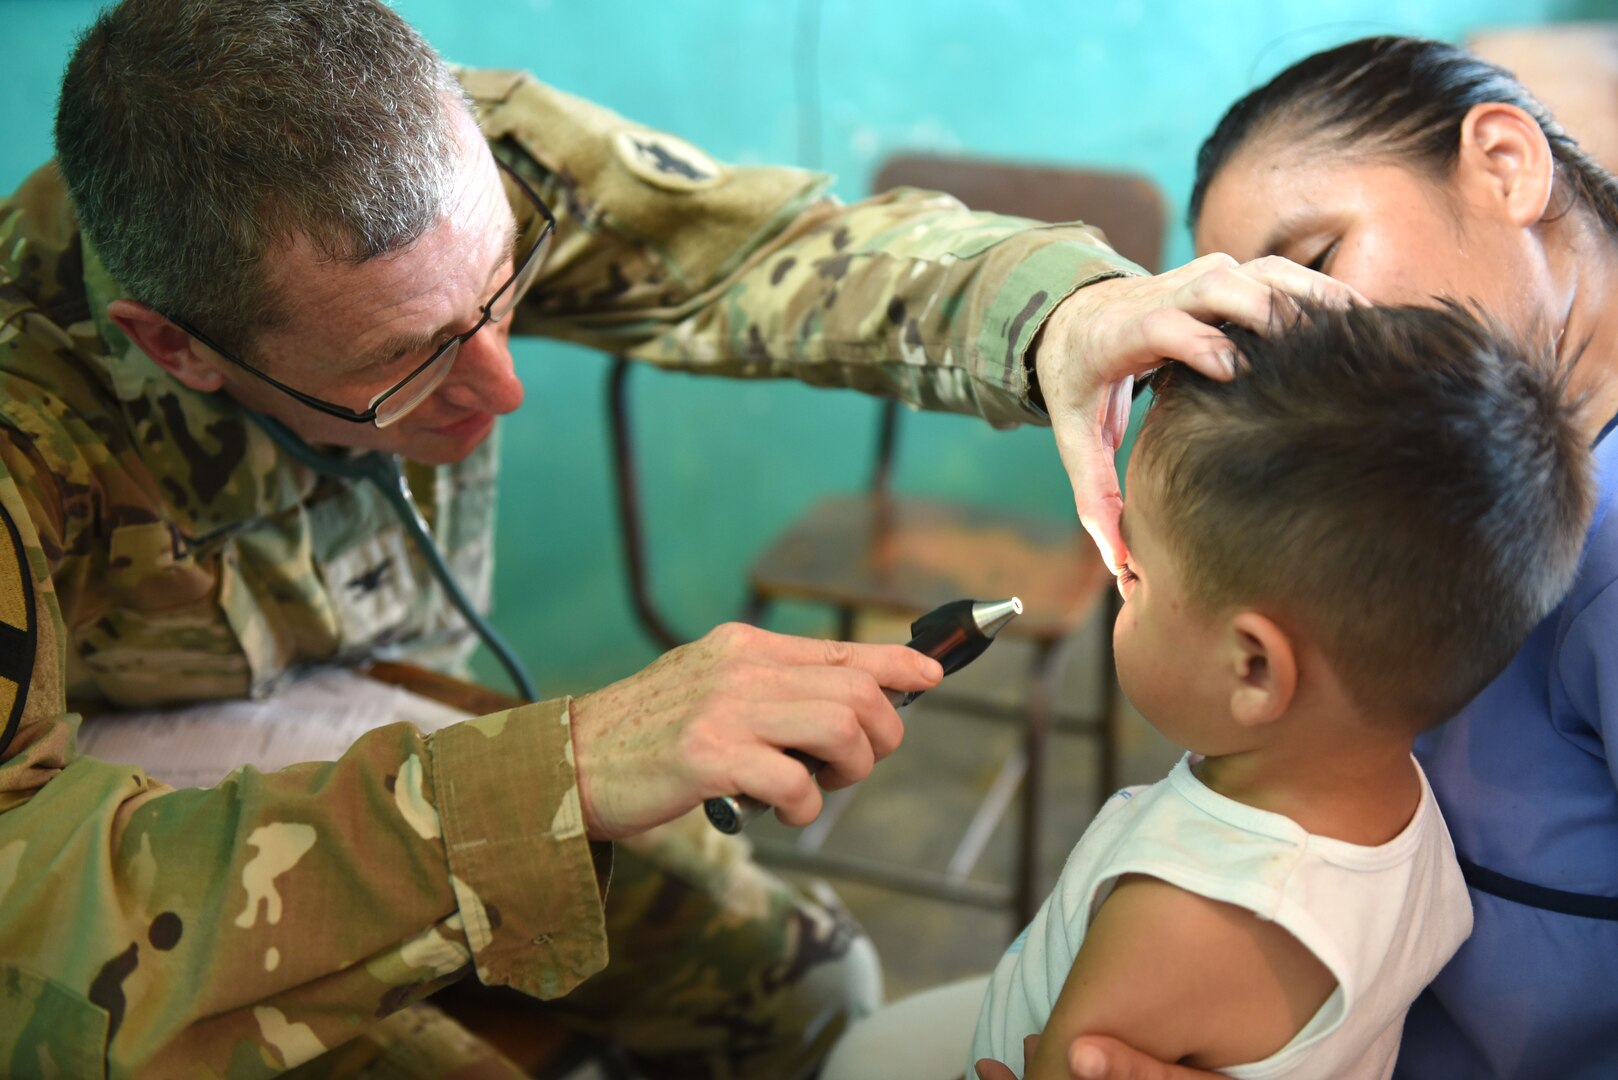 U.S. Army Col. Douglas Lougee, Joint Task Force-Bravo Medical Element commander, examines a young boy during a Medical Readiness Training Exercise in Corinto, Cortes, Feb. 17, 2017. Lougee is also a pediatrician and had the opportunity to participate in a leadership role as well as a provider during the MEDRETE. (U.S. Army photo by Maria Pinel)